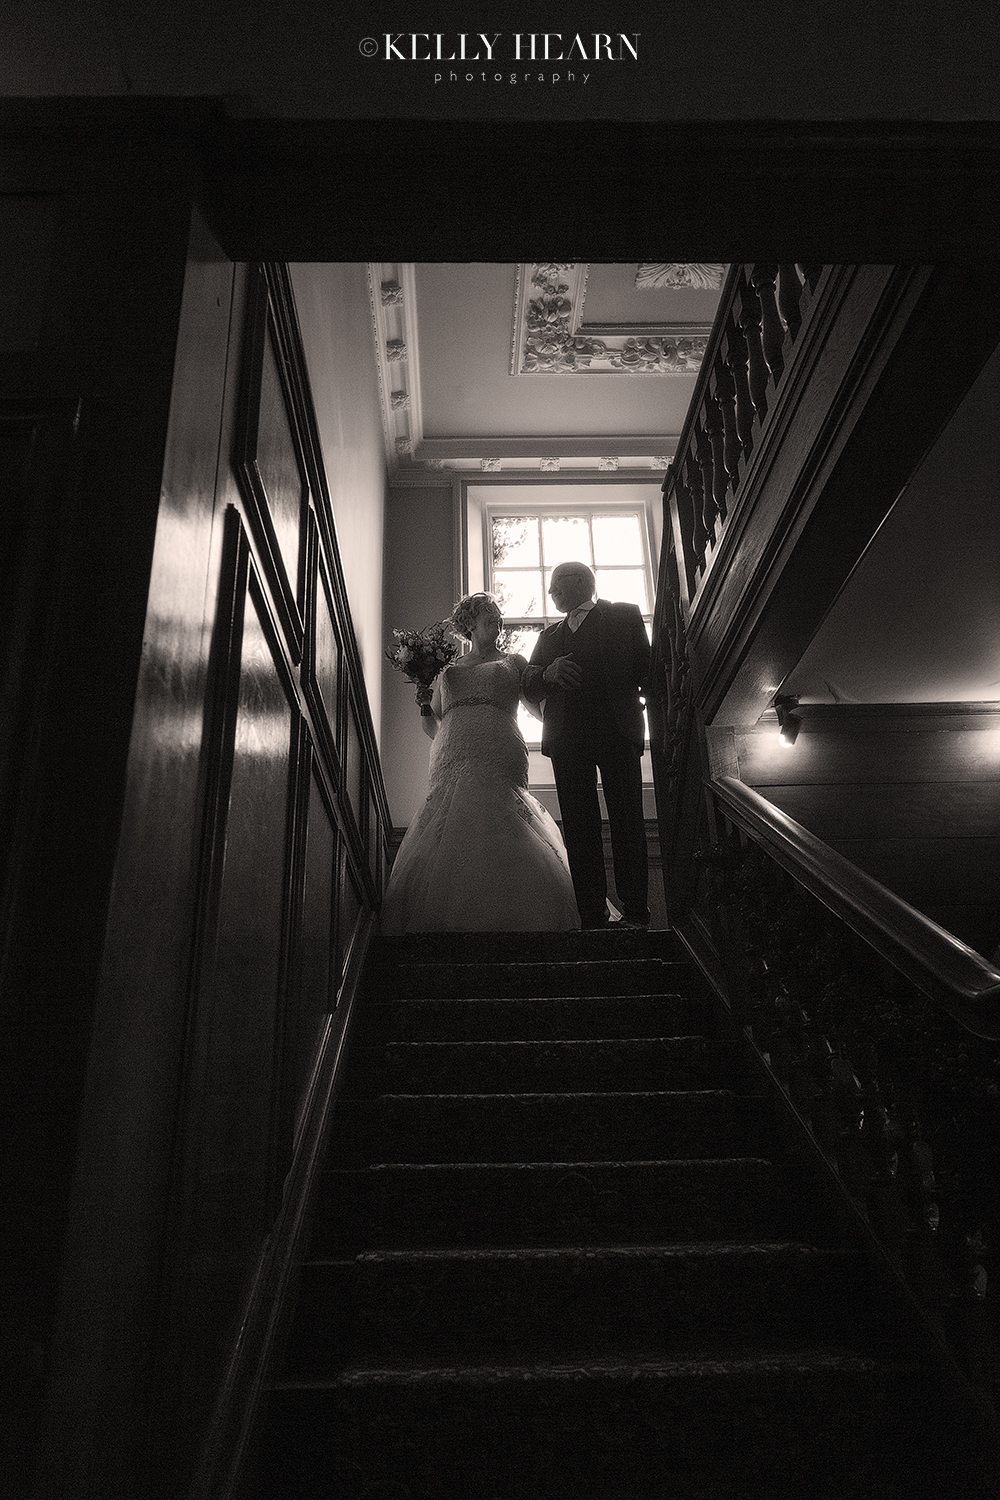 LEW_bride-and-father-stairs-black-and-white.jpg#asset:2770